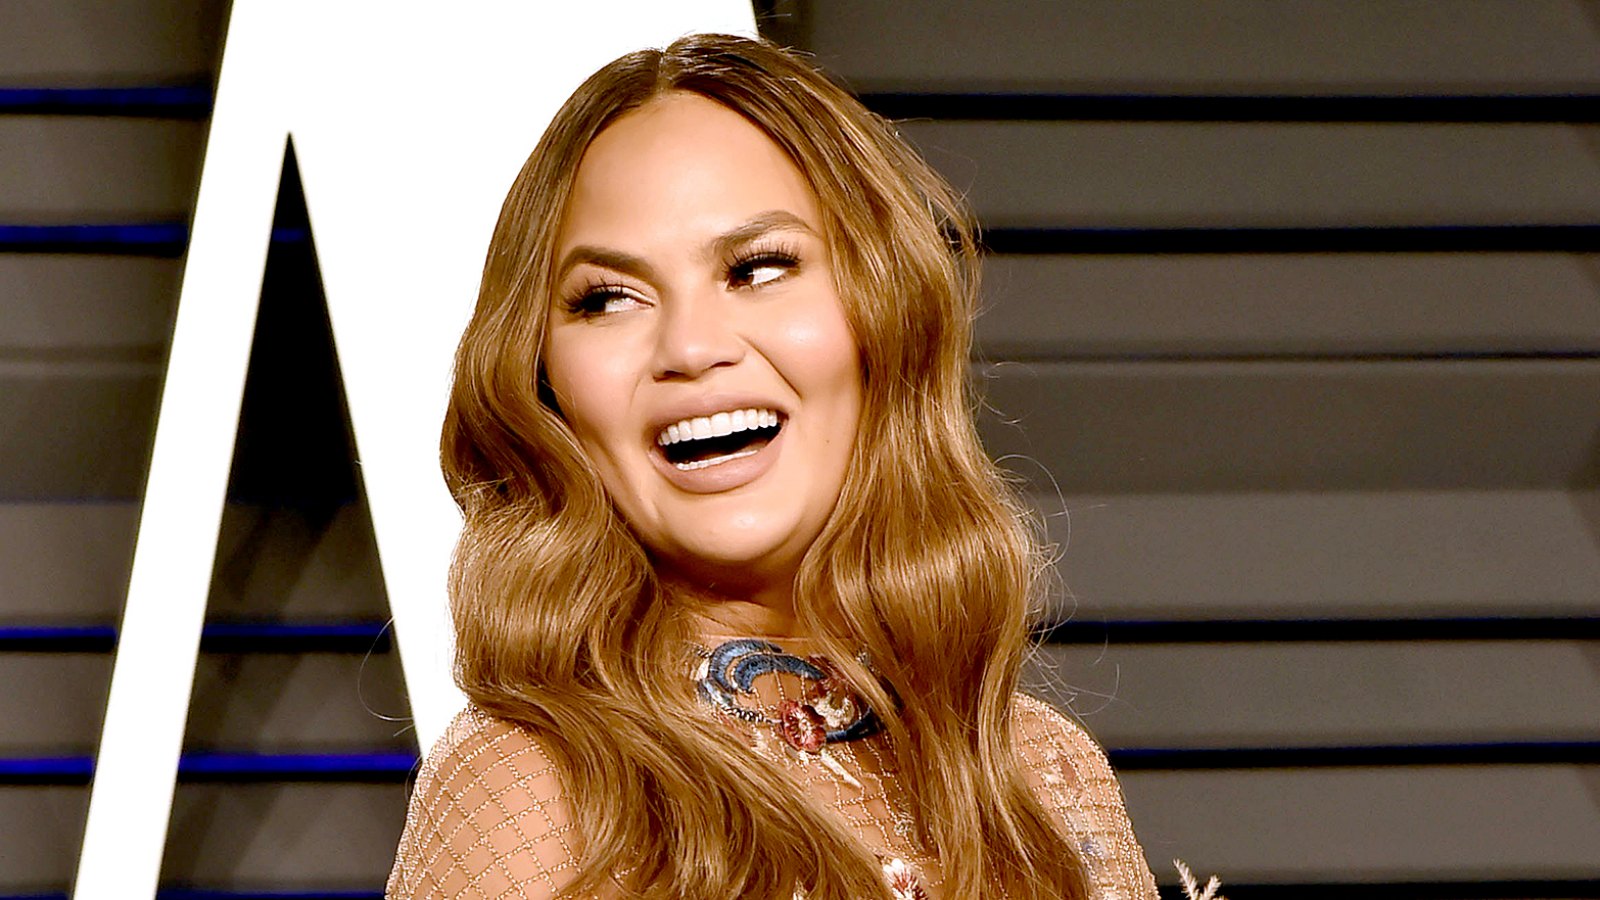 Chrissy-Teigen-Pokes-Fun-at-College-Admissions-Scam-With-Photoshop